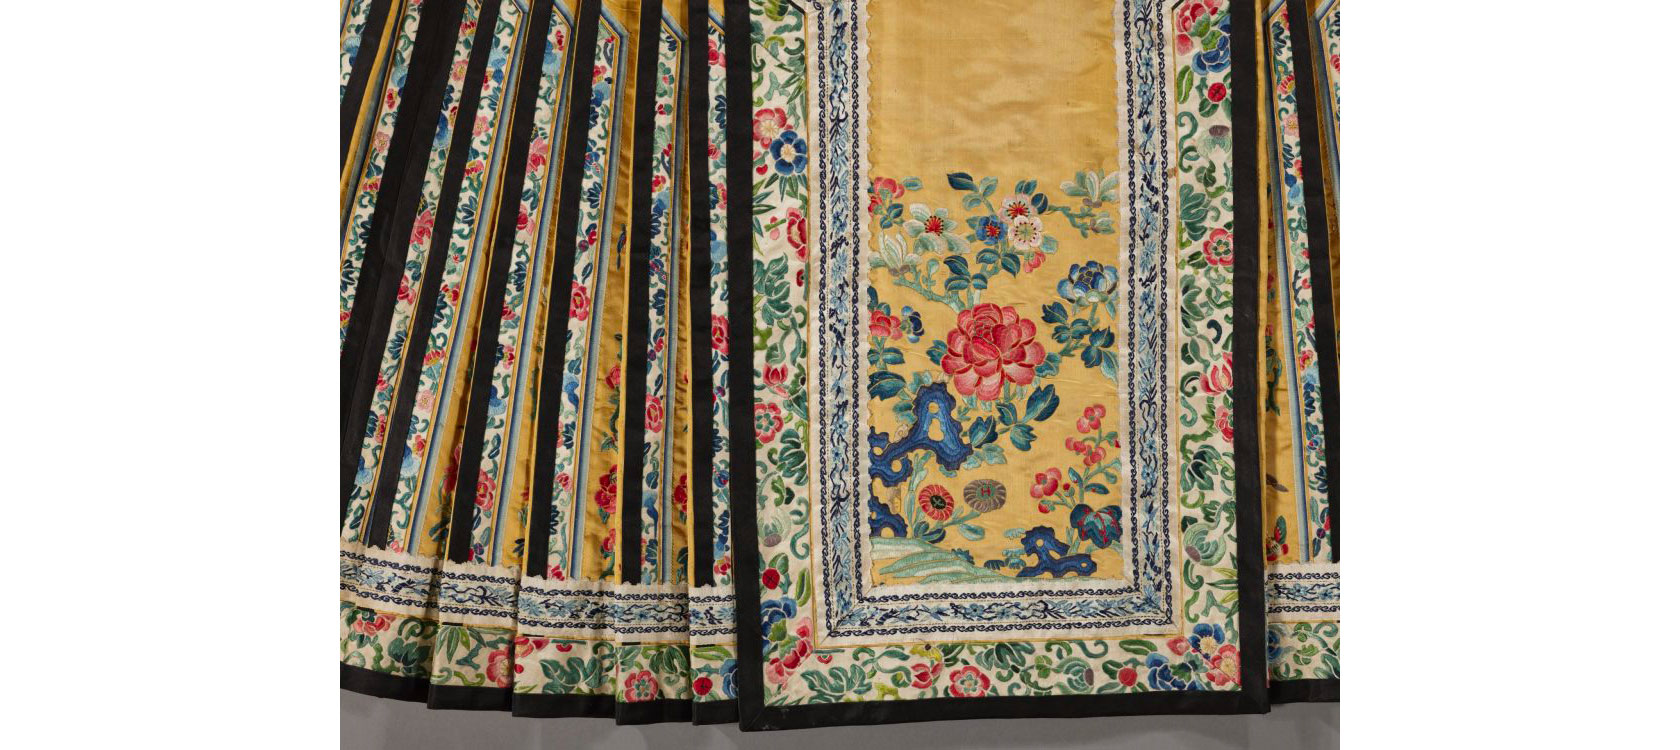 (Detail) Yellow Skirt with Rose Embroidery, China, 19th century. Embroidered satin, 48 inches by 37 3/4 inches. Gift of Mrs. David Beals, 44-63/1.